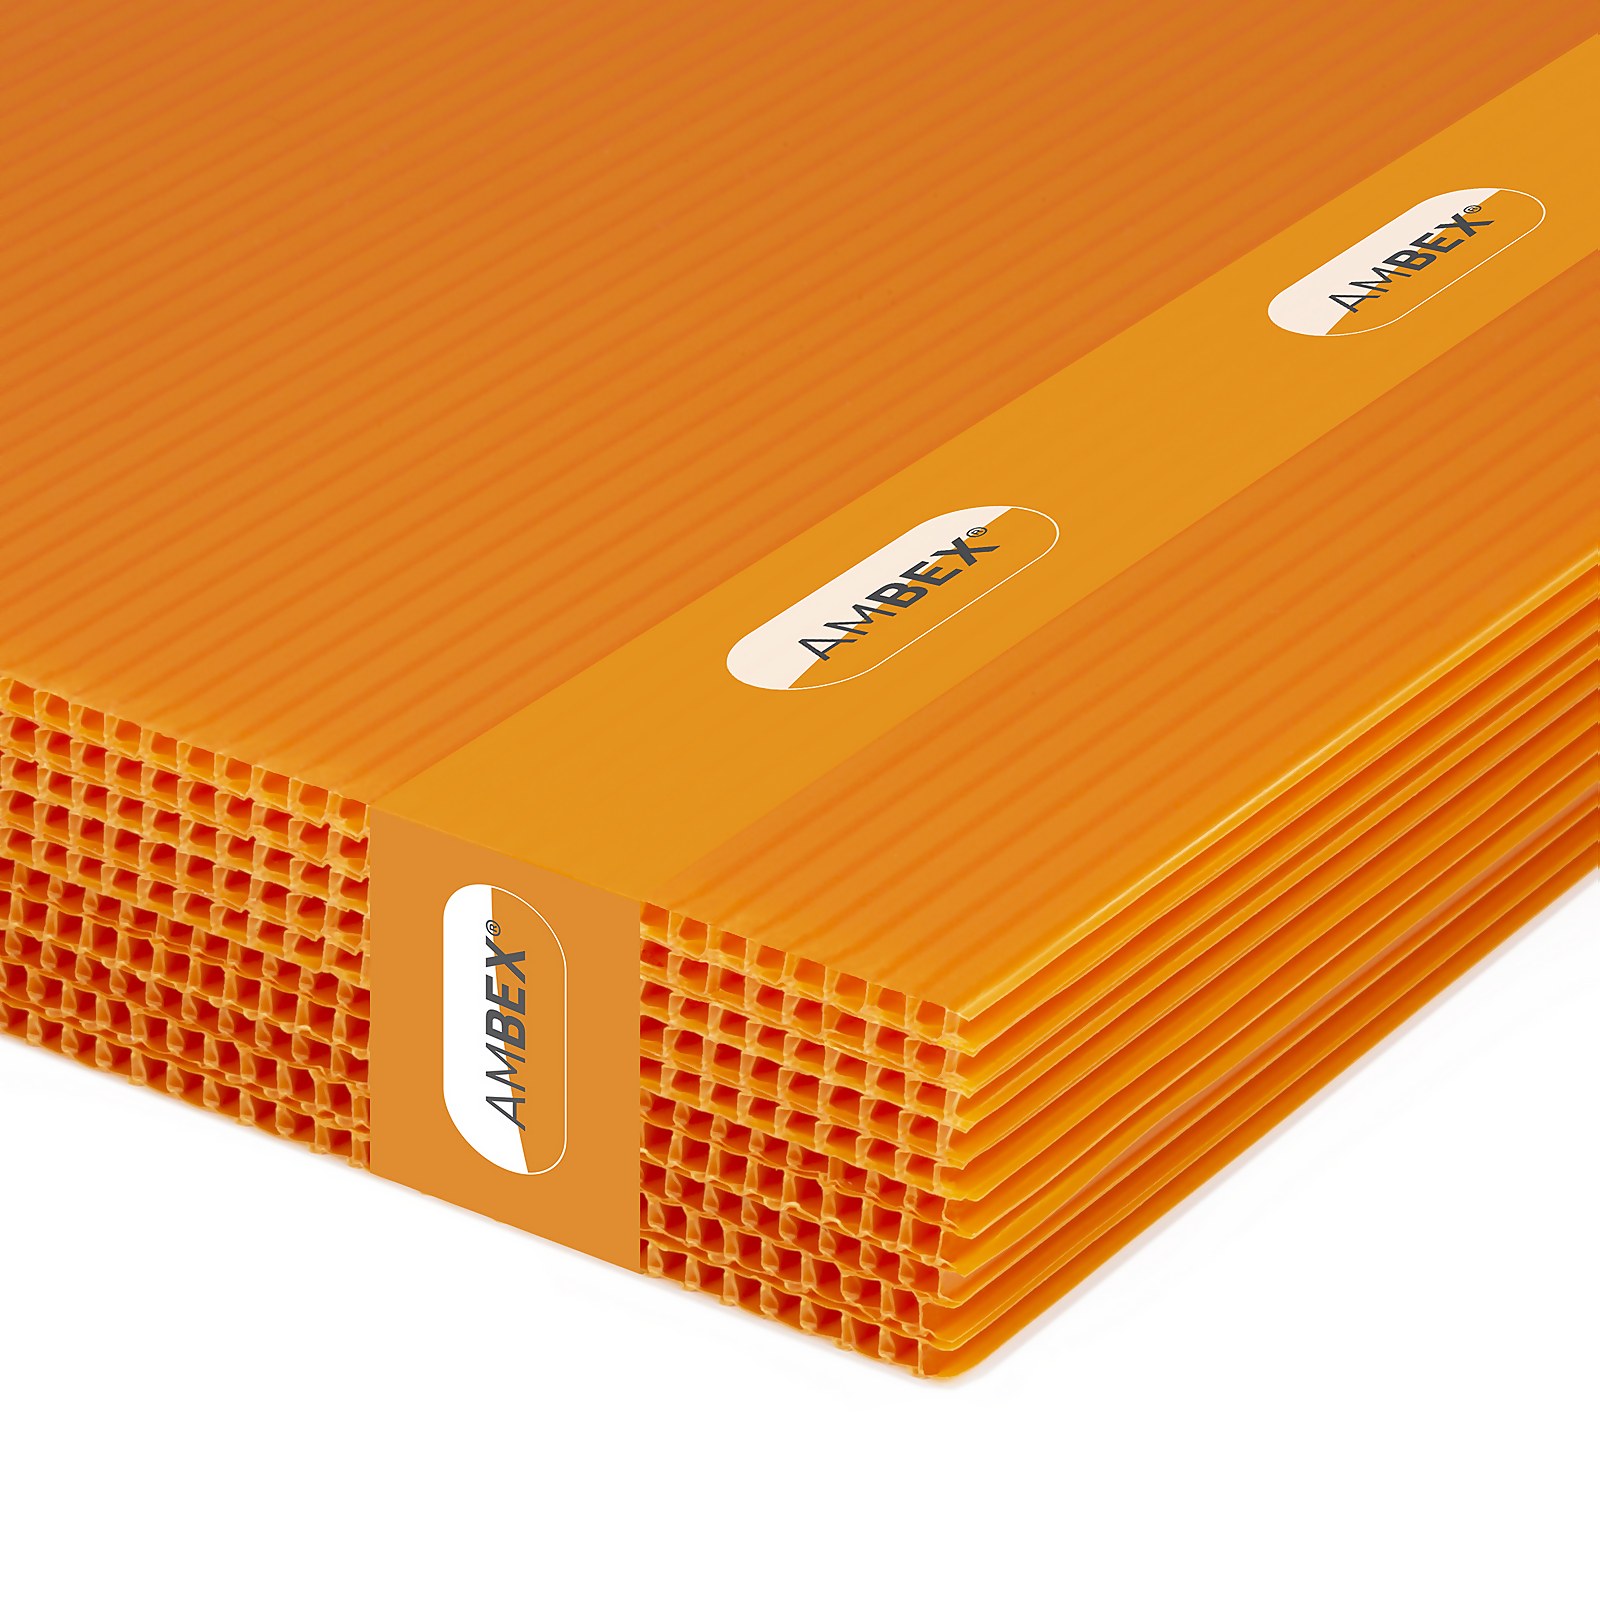 Ambex® Surface Protection Sheet 700 x 1500mm 10 Pack